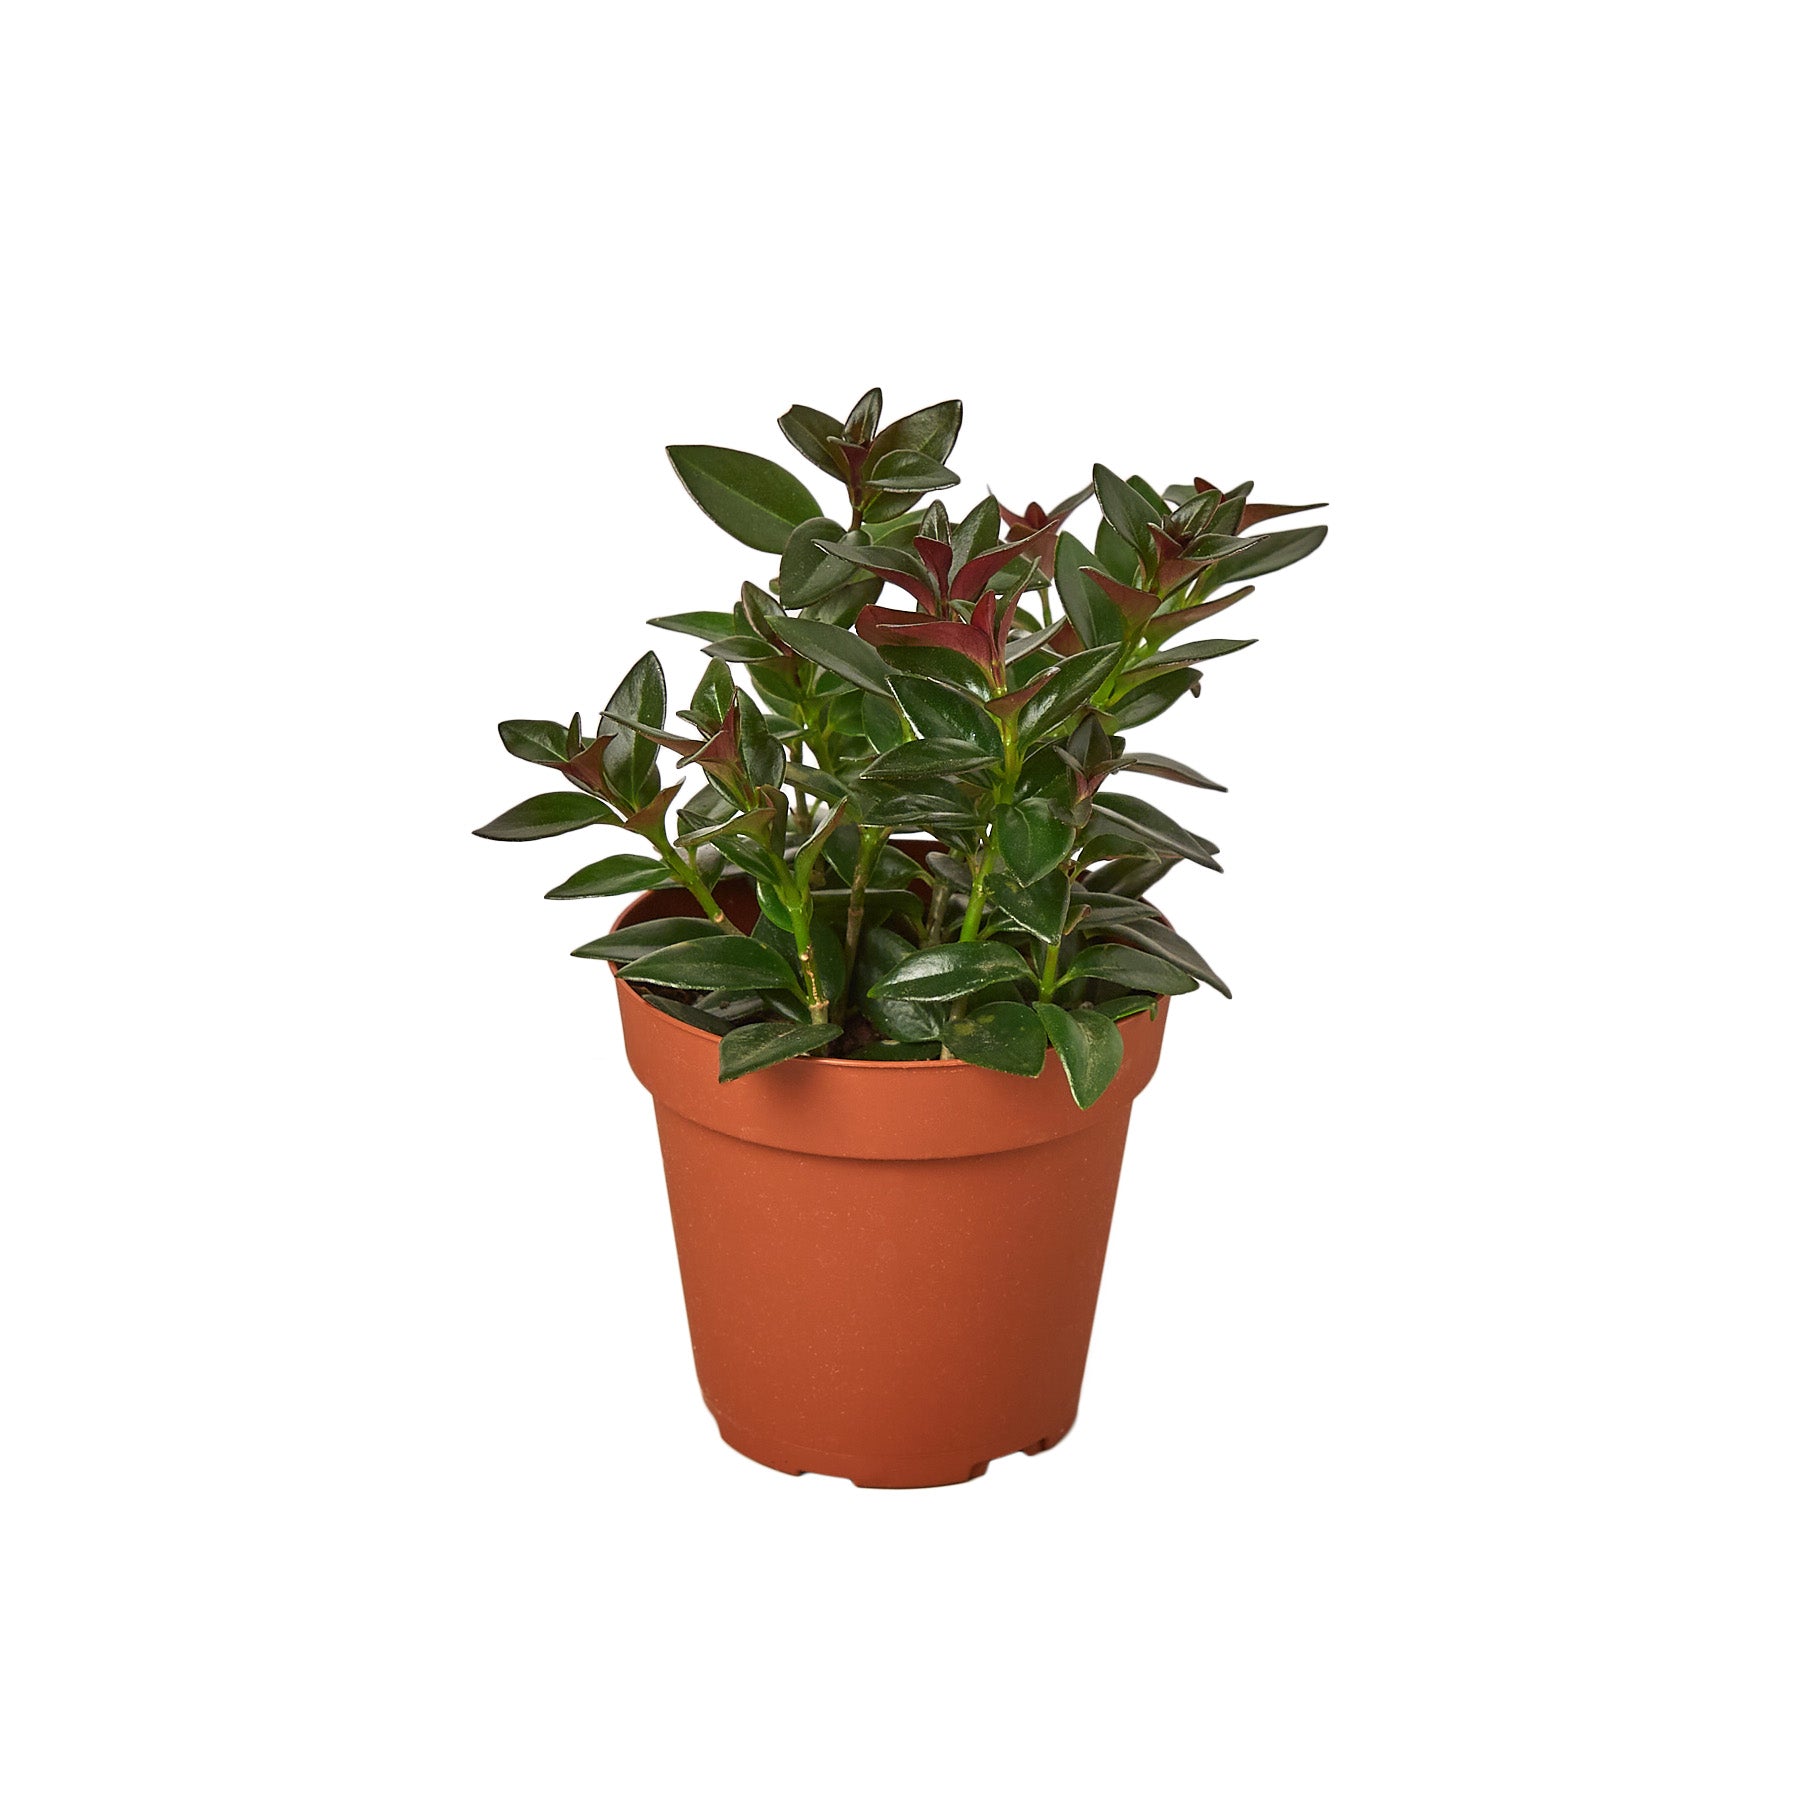 A small plant on a white background, perfect for those searching for a nearby plant nursery.